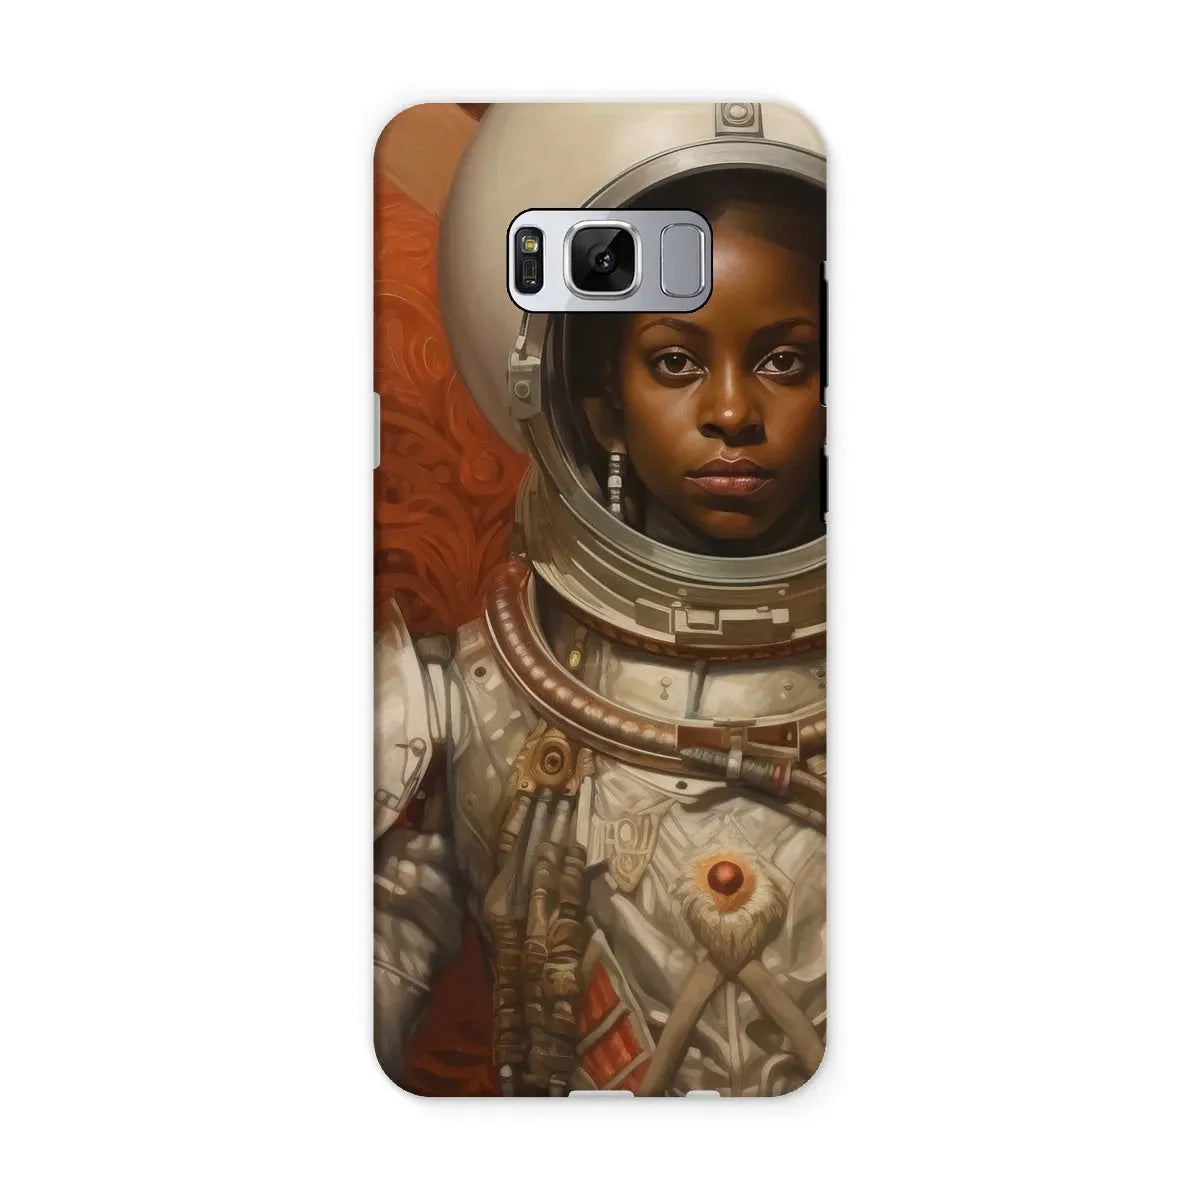 Ava The Lesbian Astronaut - Sapphic Aesthetic Phone Case - Samsung Galaxy S8 / Matte - Mobile Phone Cases - Aesthetic